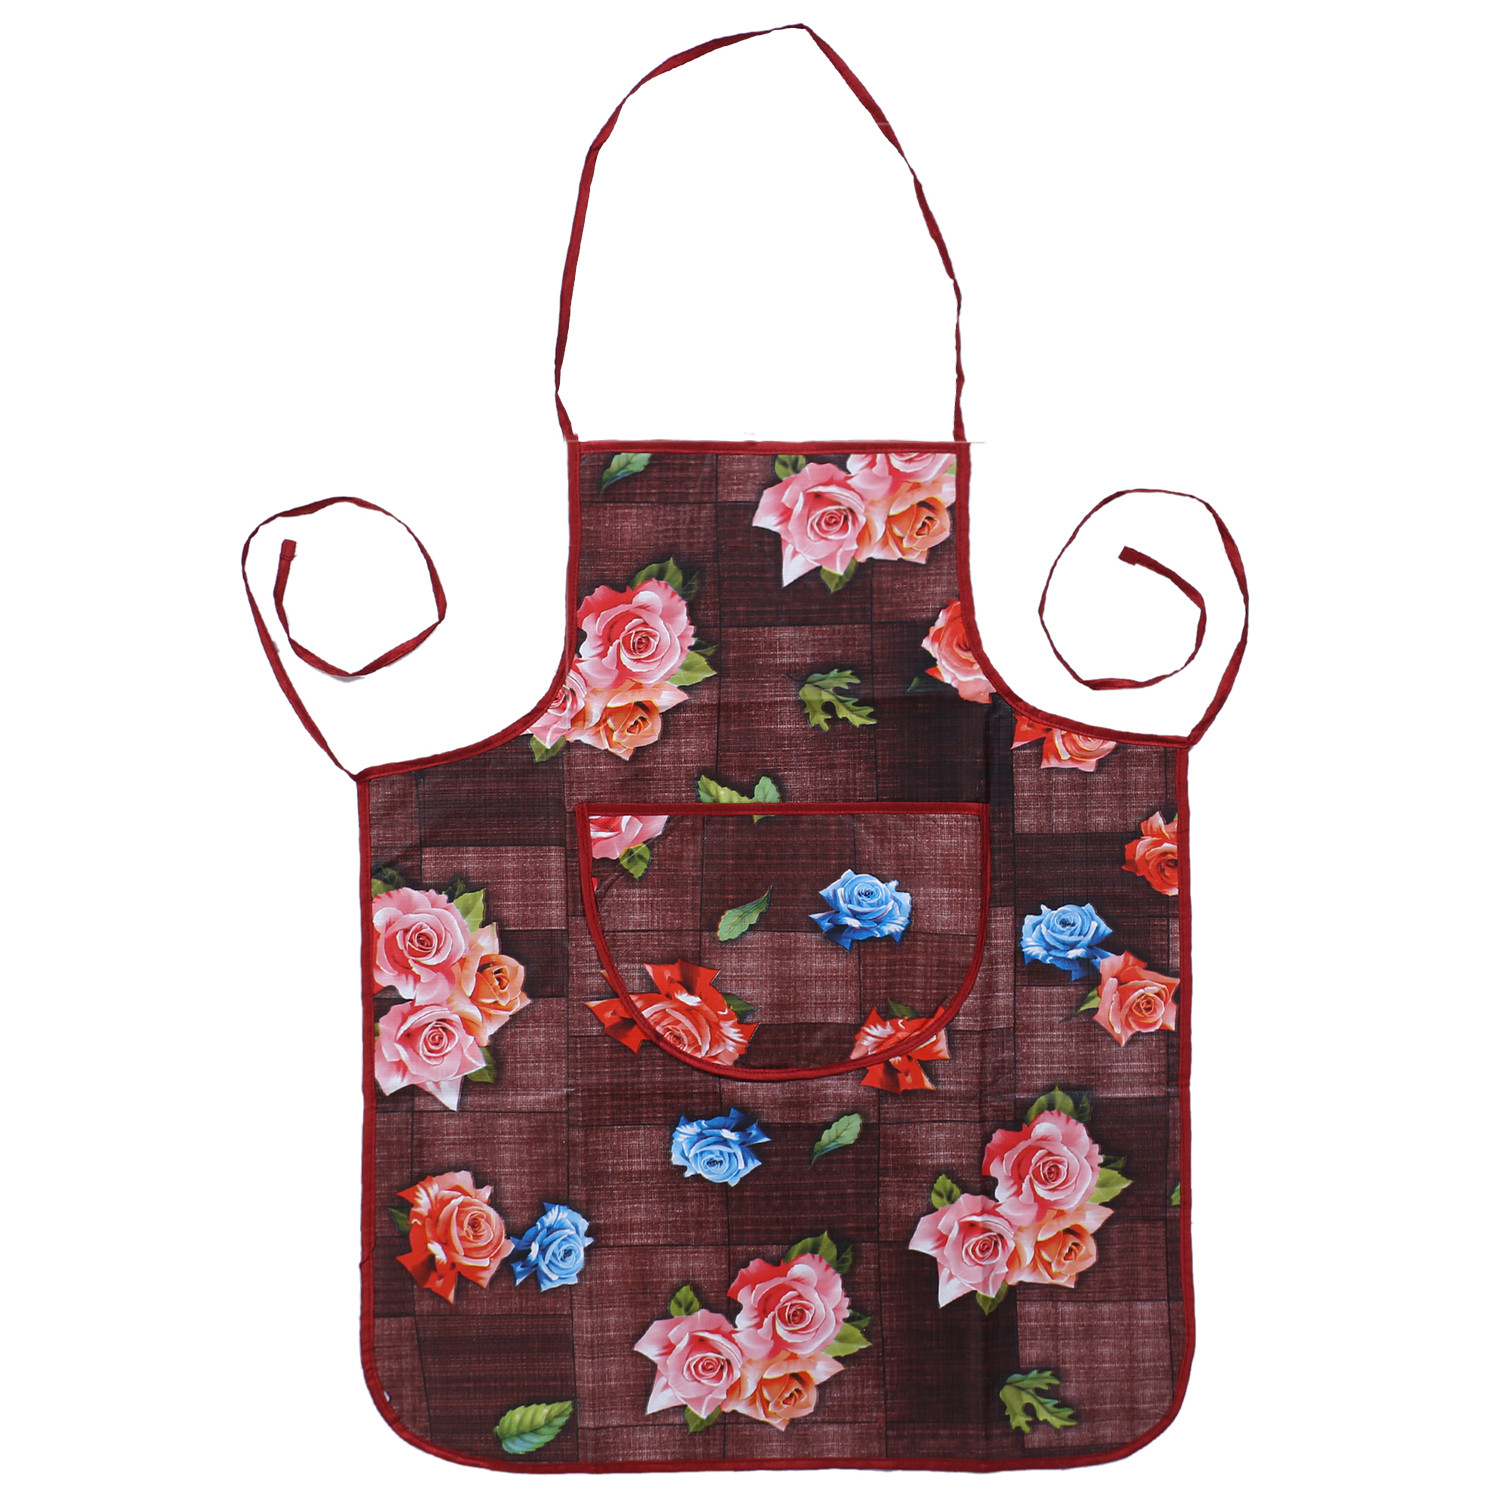 Kuber Industries Apron|PVC Unique Rose & Check Print Kitchen Chef Cloth|Waterproof Centre Pocket Apron With Tying Cord for Men & Women,Pack of 2 (Maroon & Gray)